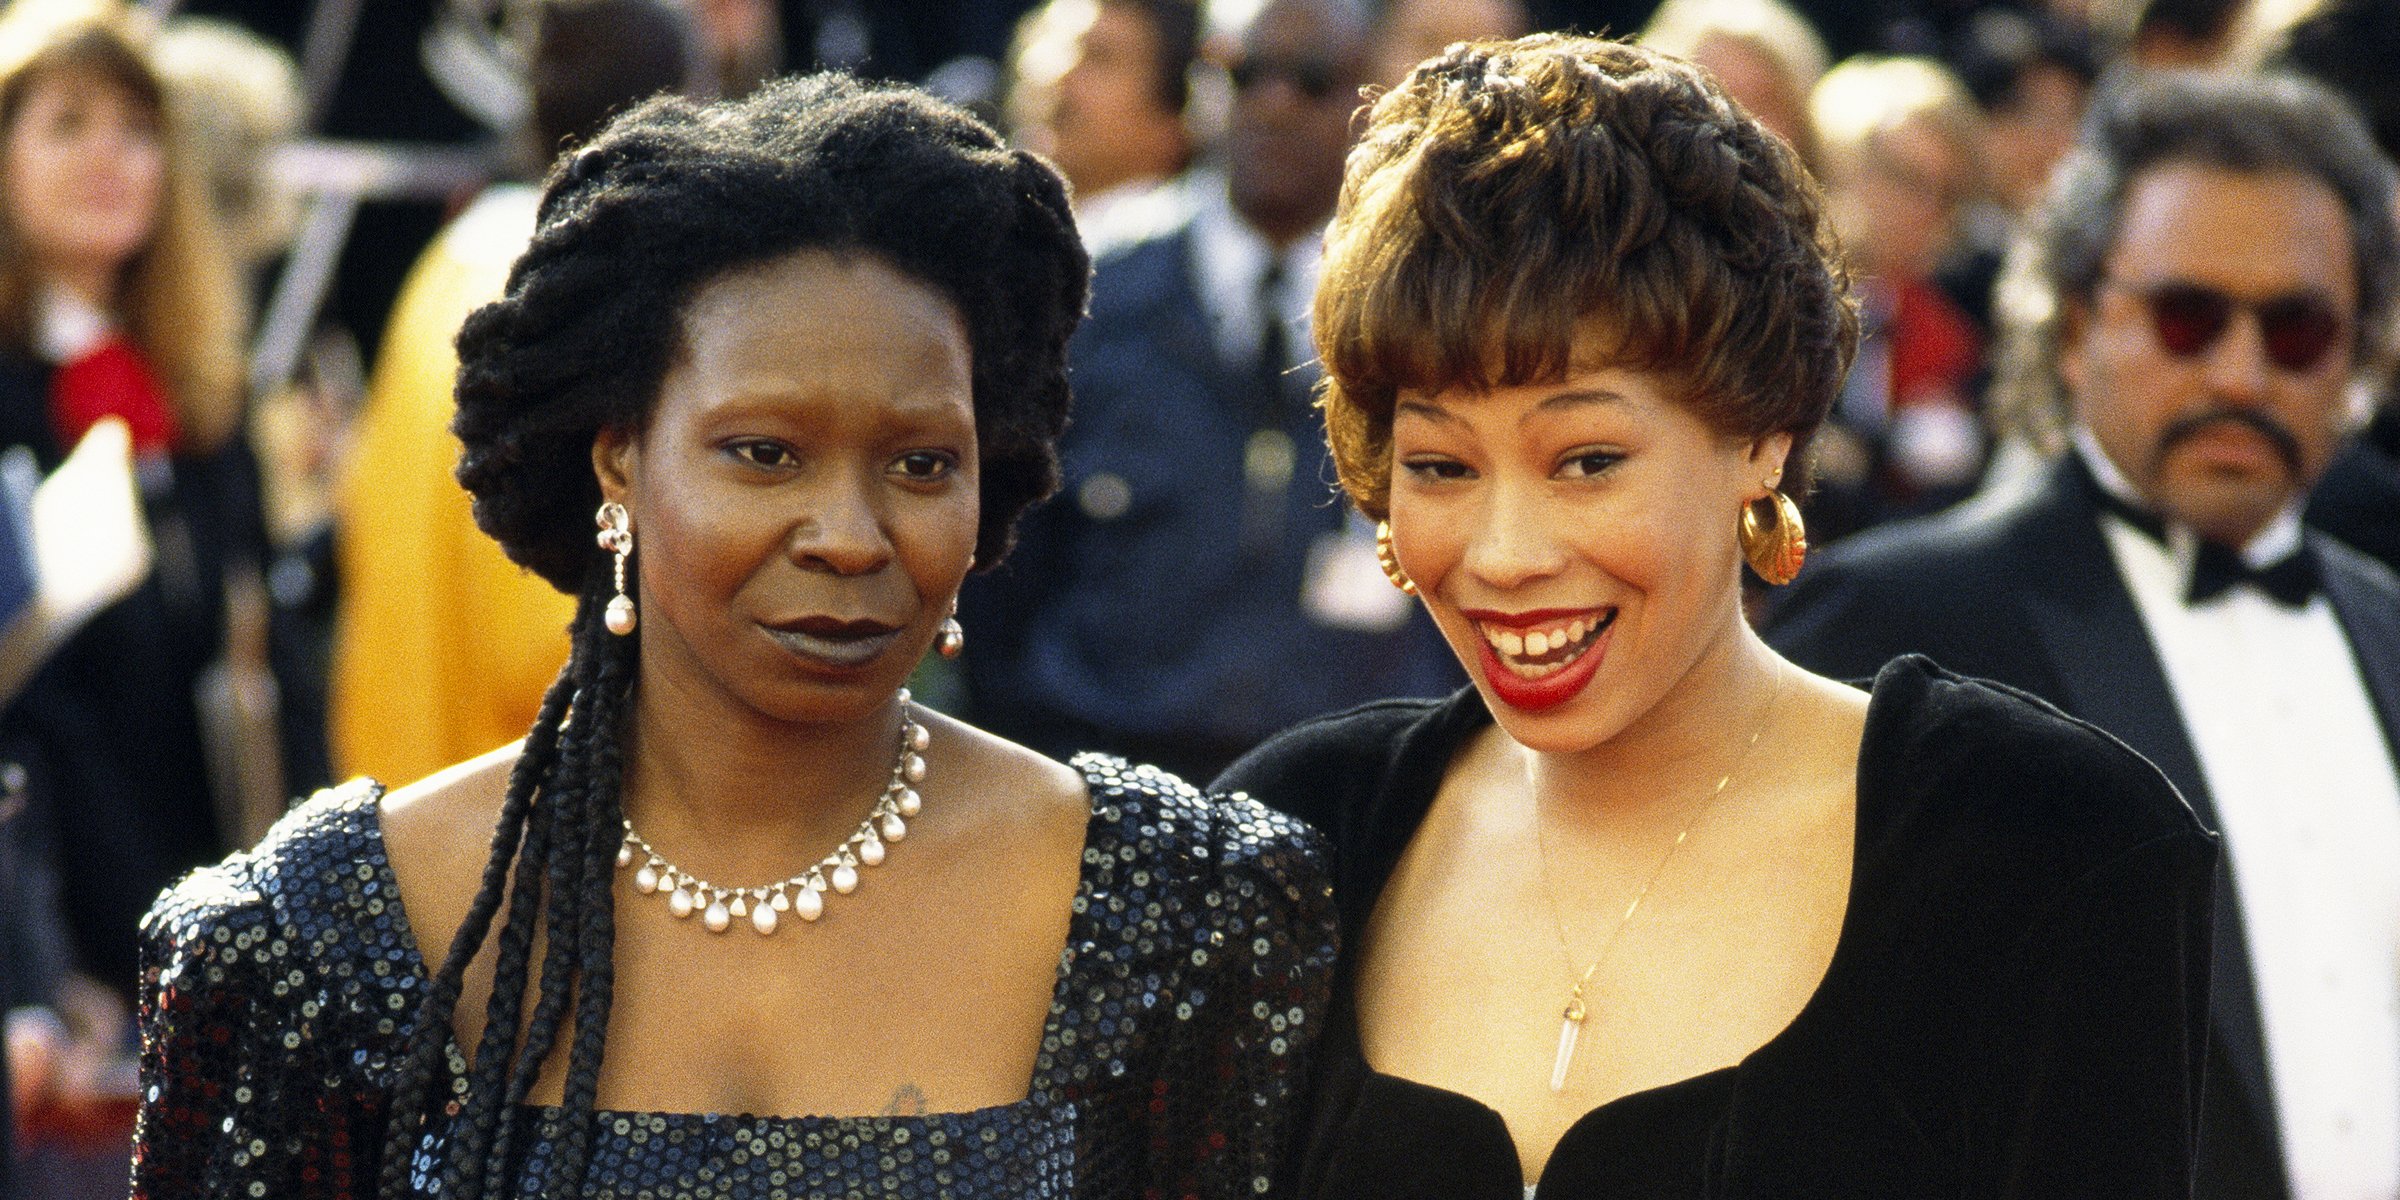 Whoopi Goldberg Is Pictured with Her Daughter, Alexandrea Martin | Source: Getty Images